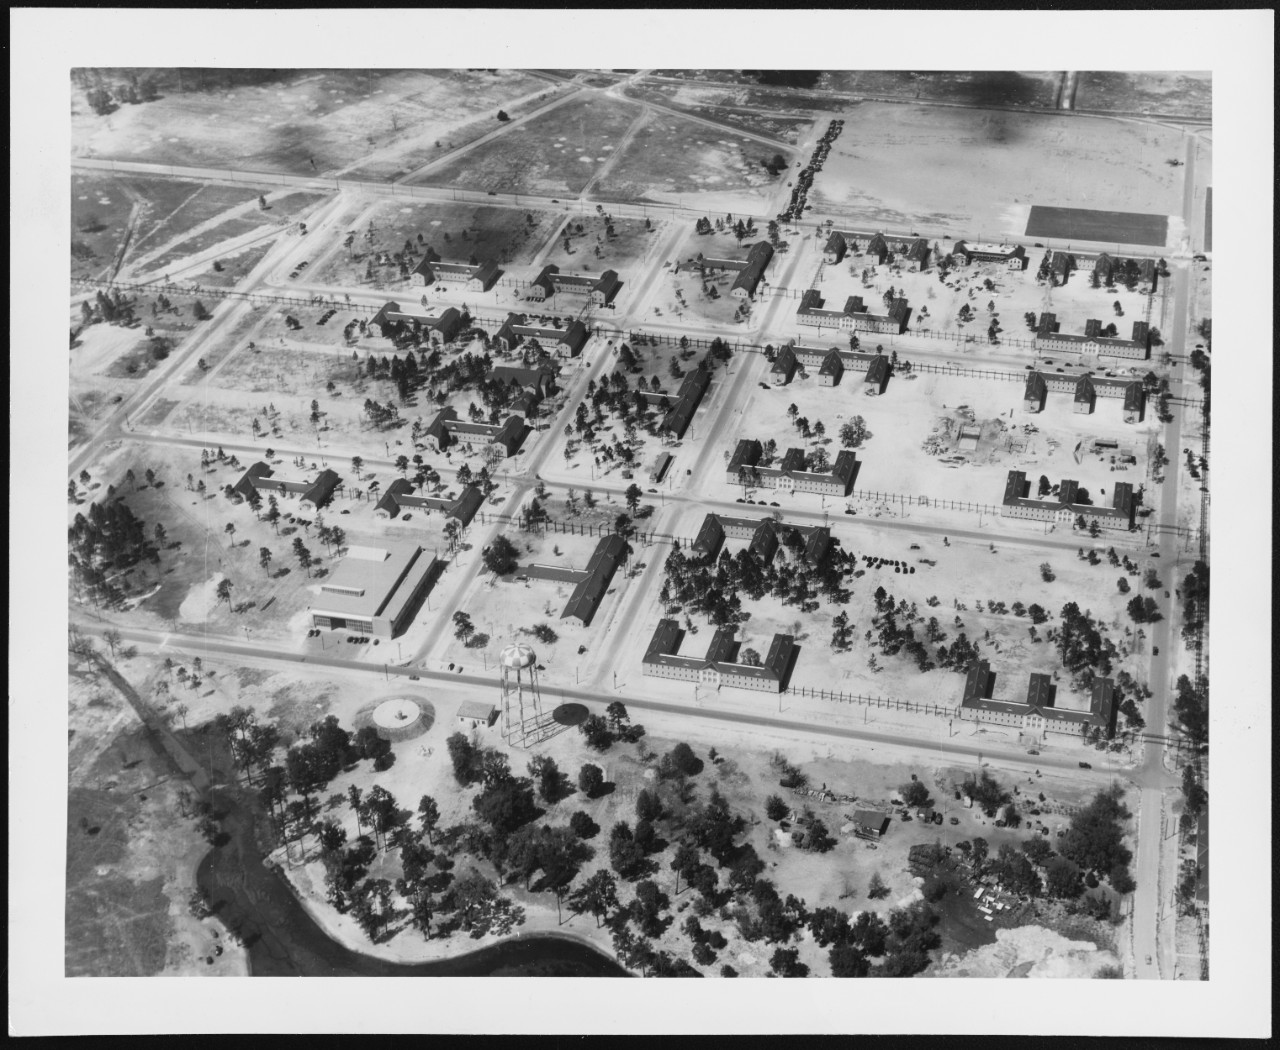 Aerial photograph of Cadet area, Ground school, U.S. Naval Air Station, Jacksonville, Florida. March 31, 1941